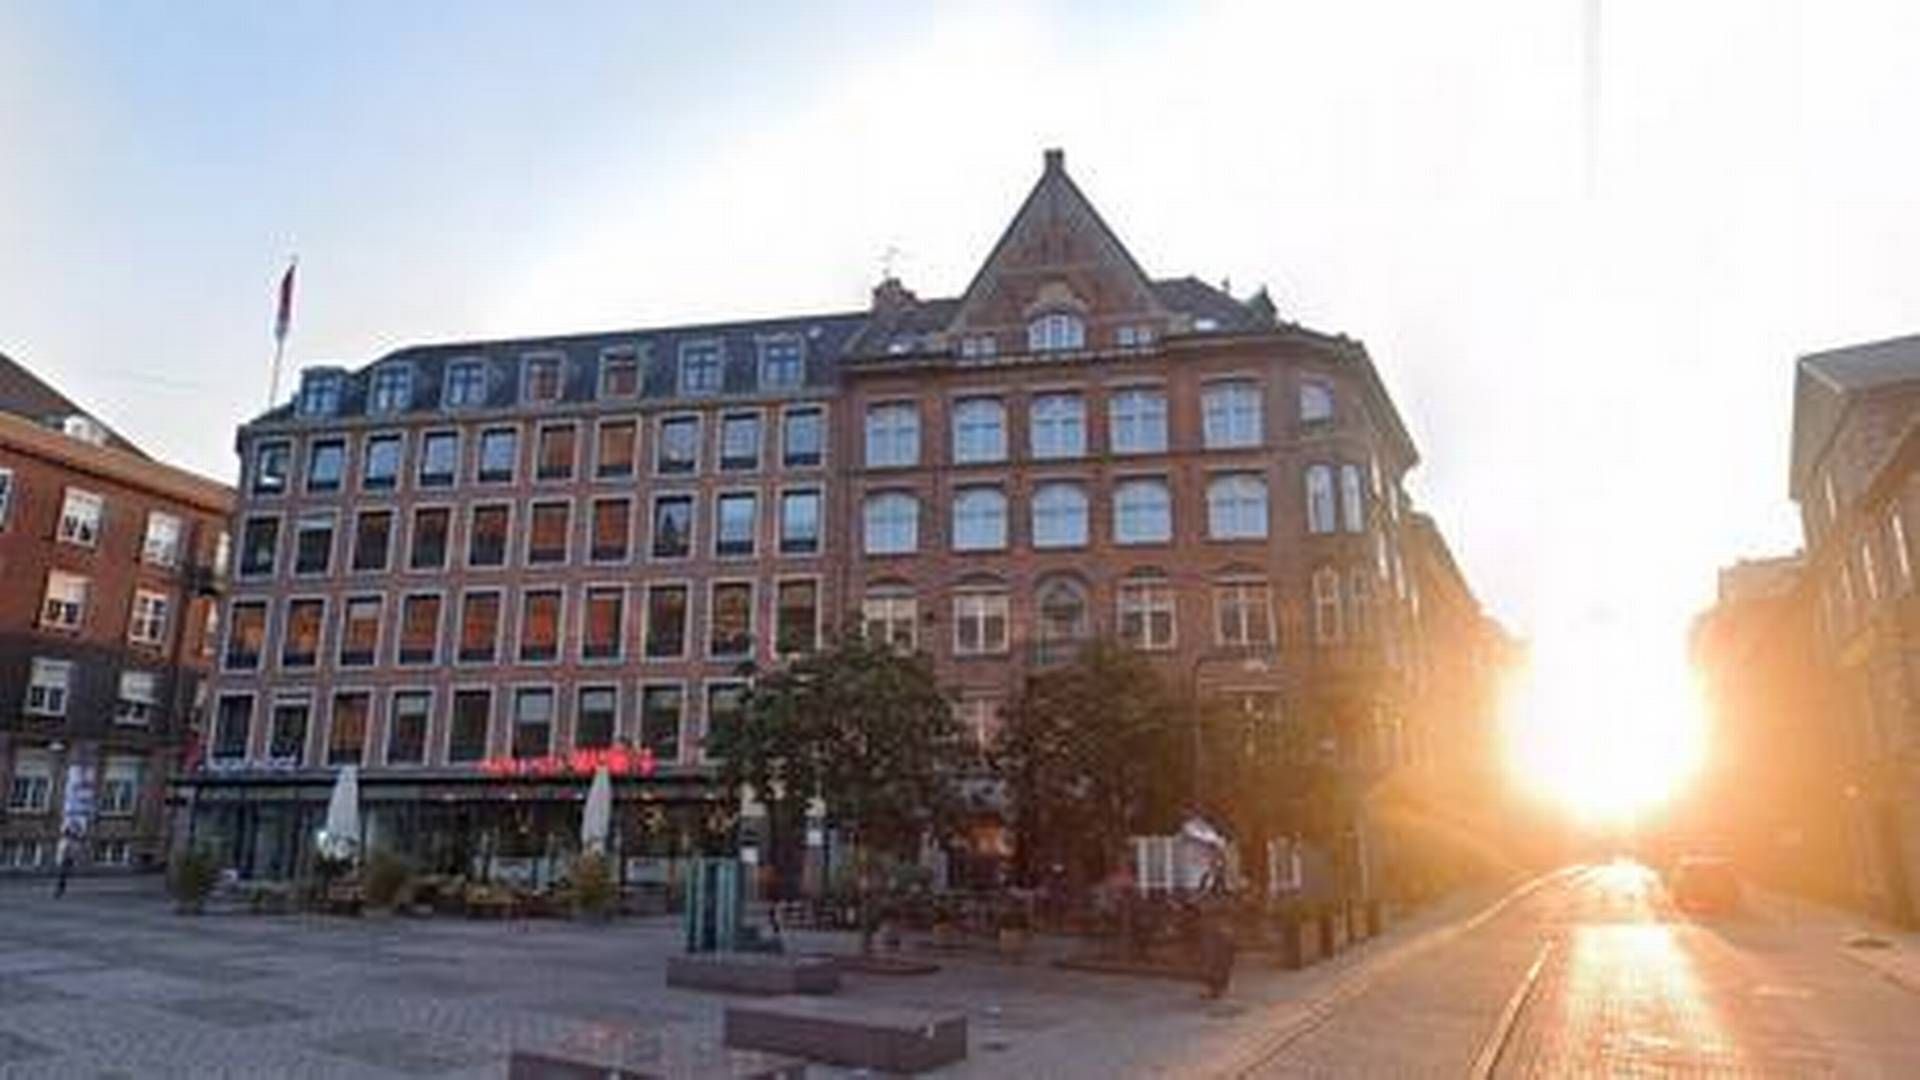 Pensam has bought the last of three properties put up for sale by the Municipality of Copenhagen last year. | Photo: Google Maps